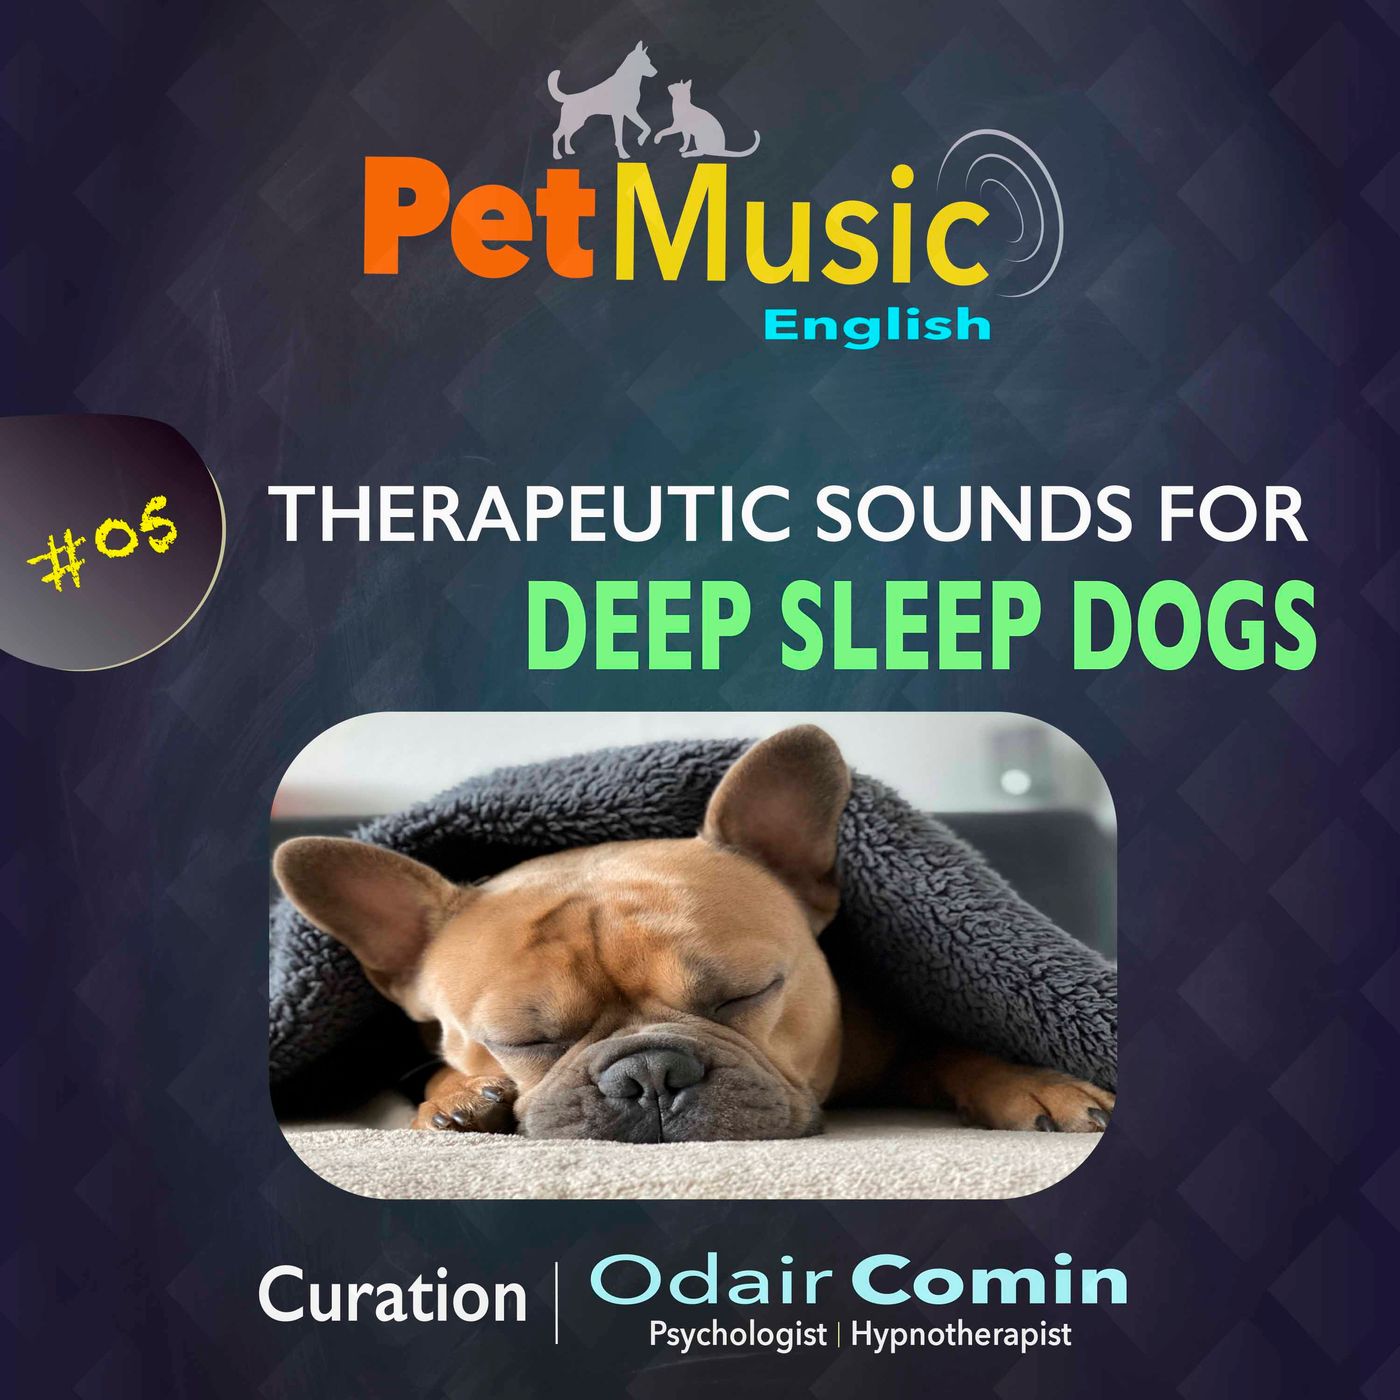 #05 Therapeutic Sounds for Deep Sleep Dogs | PetMusic